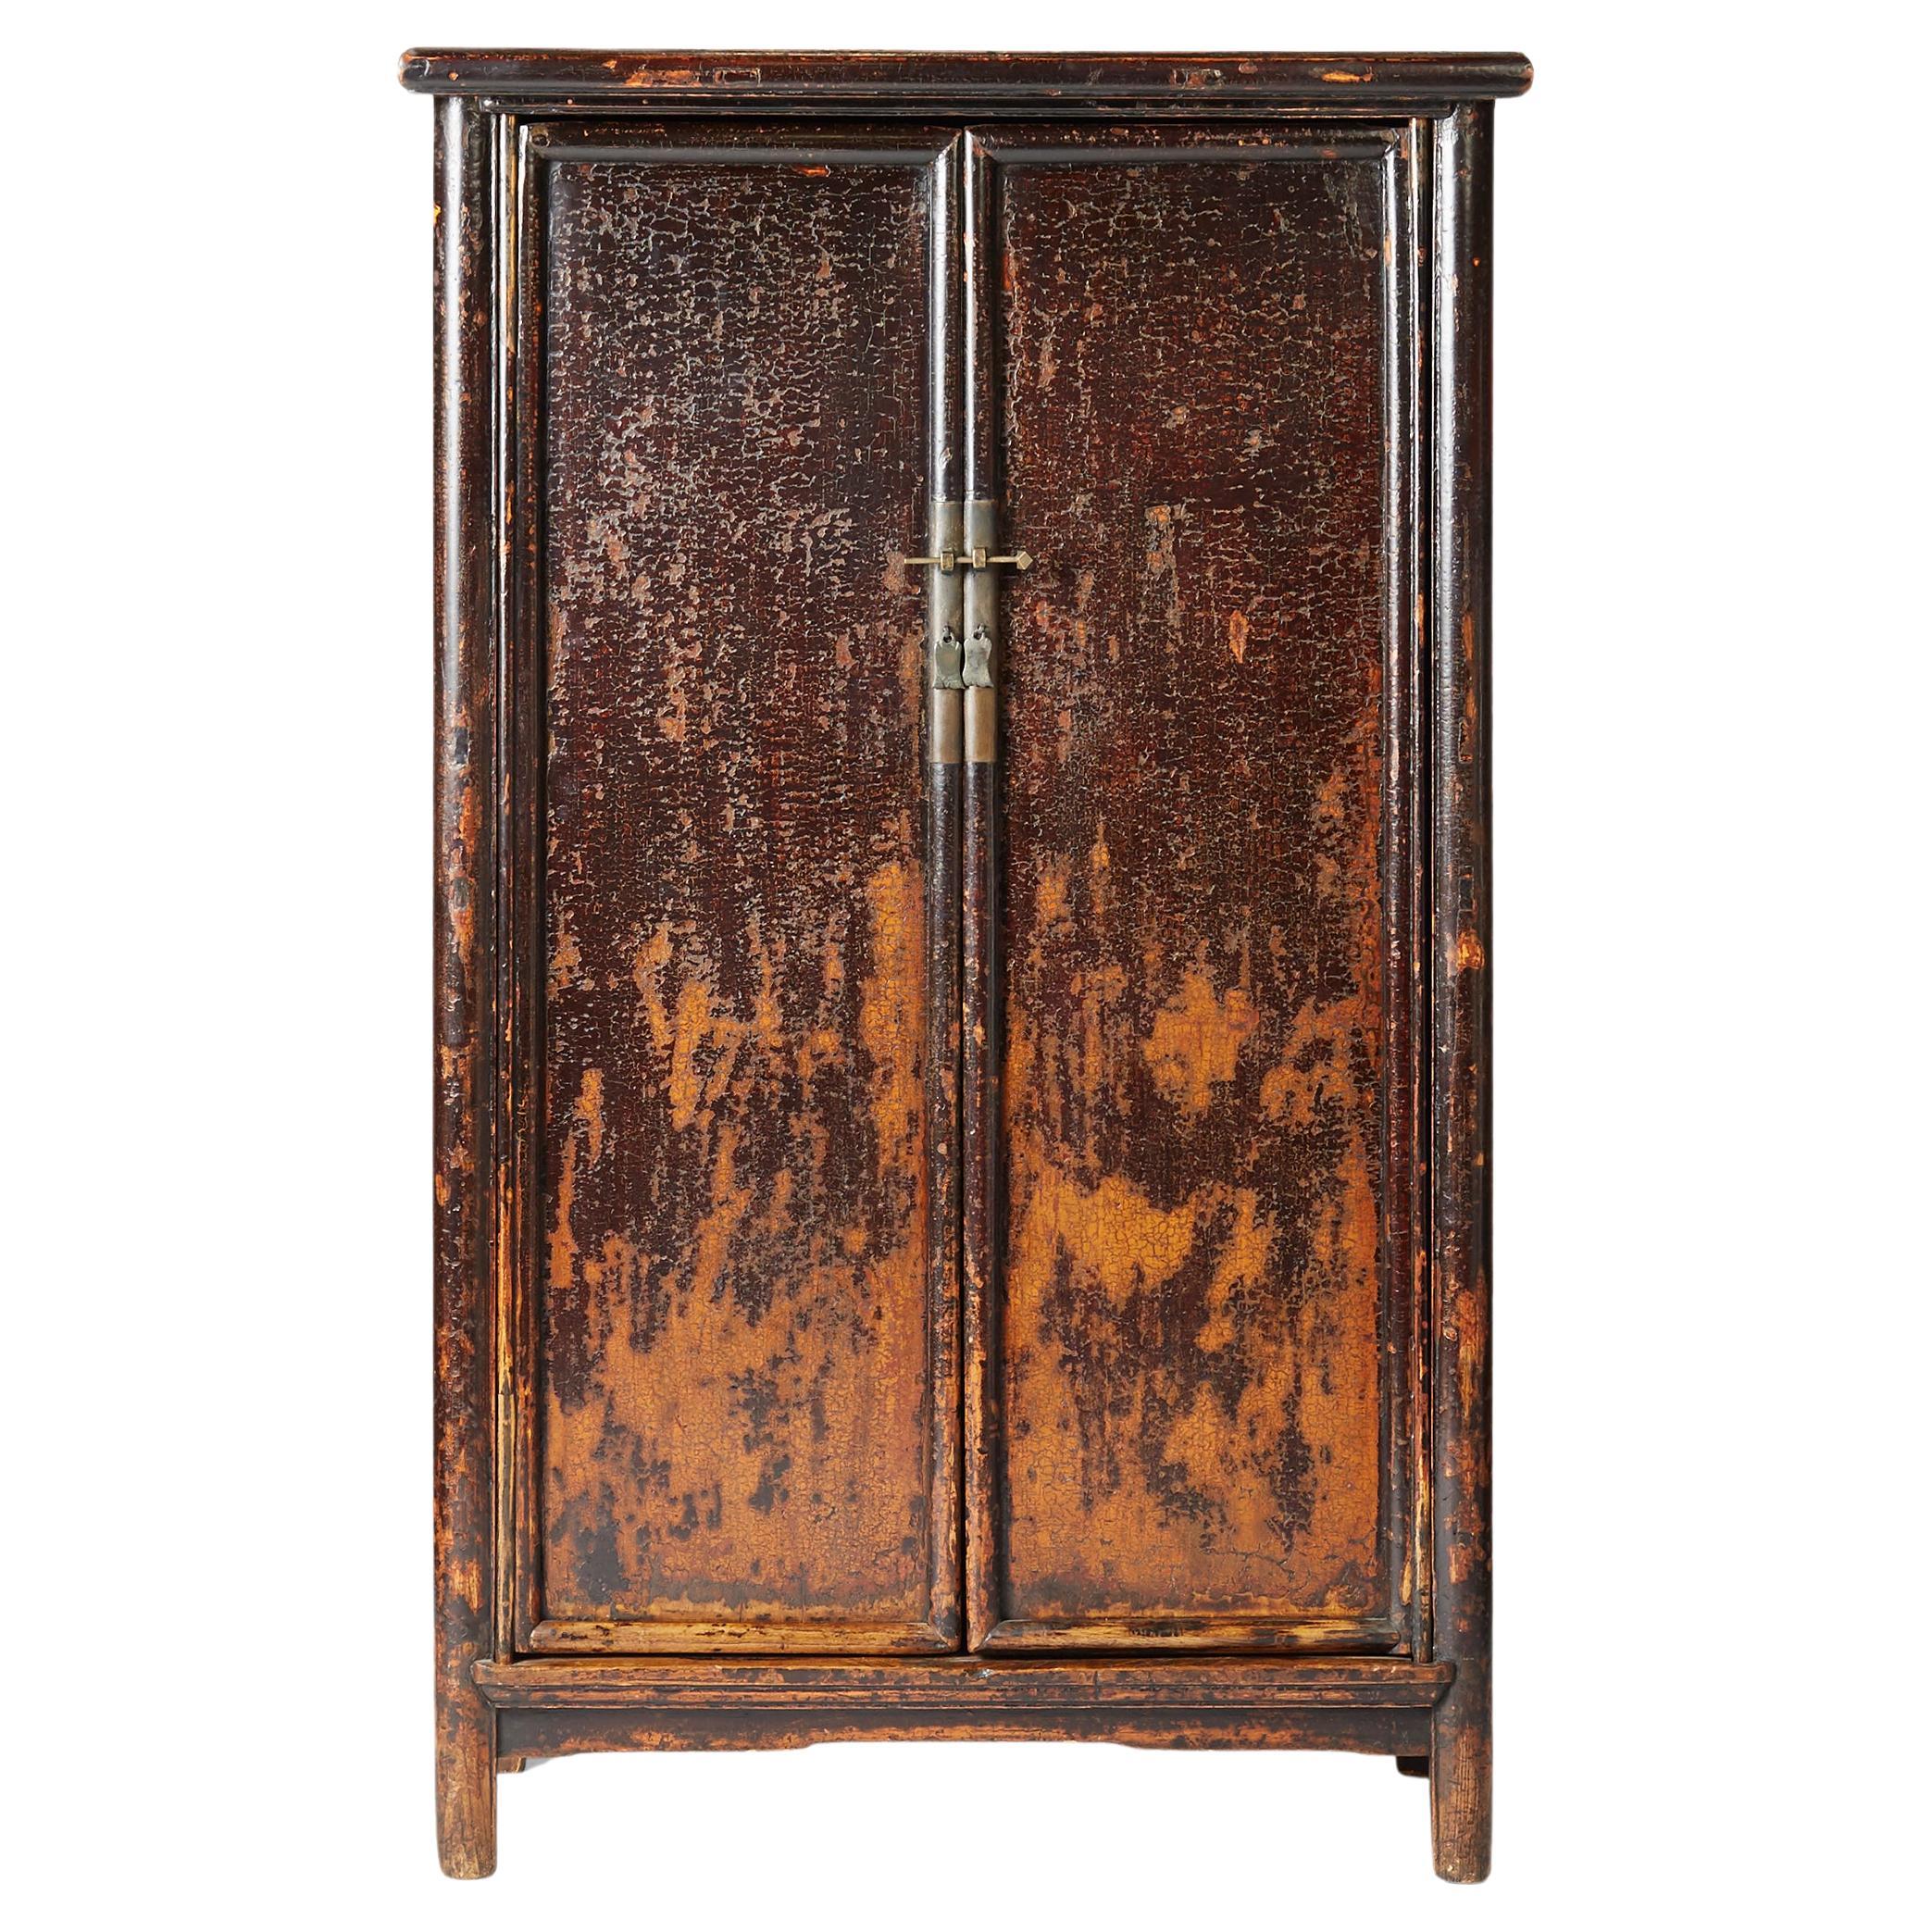 Chinese Crackled Lacquer Tapered Cabinet, c. 1750 For Sale